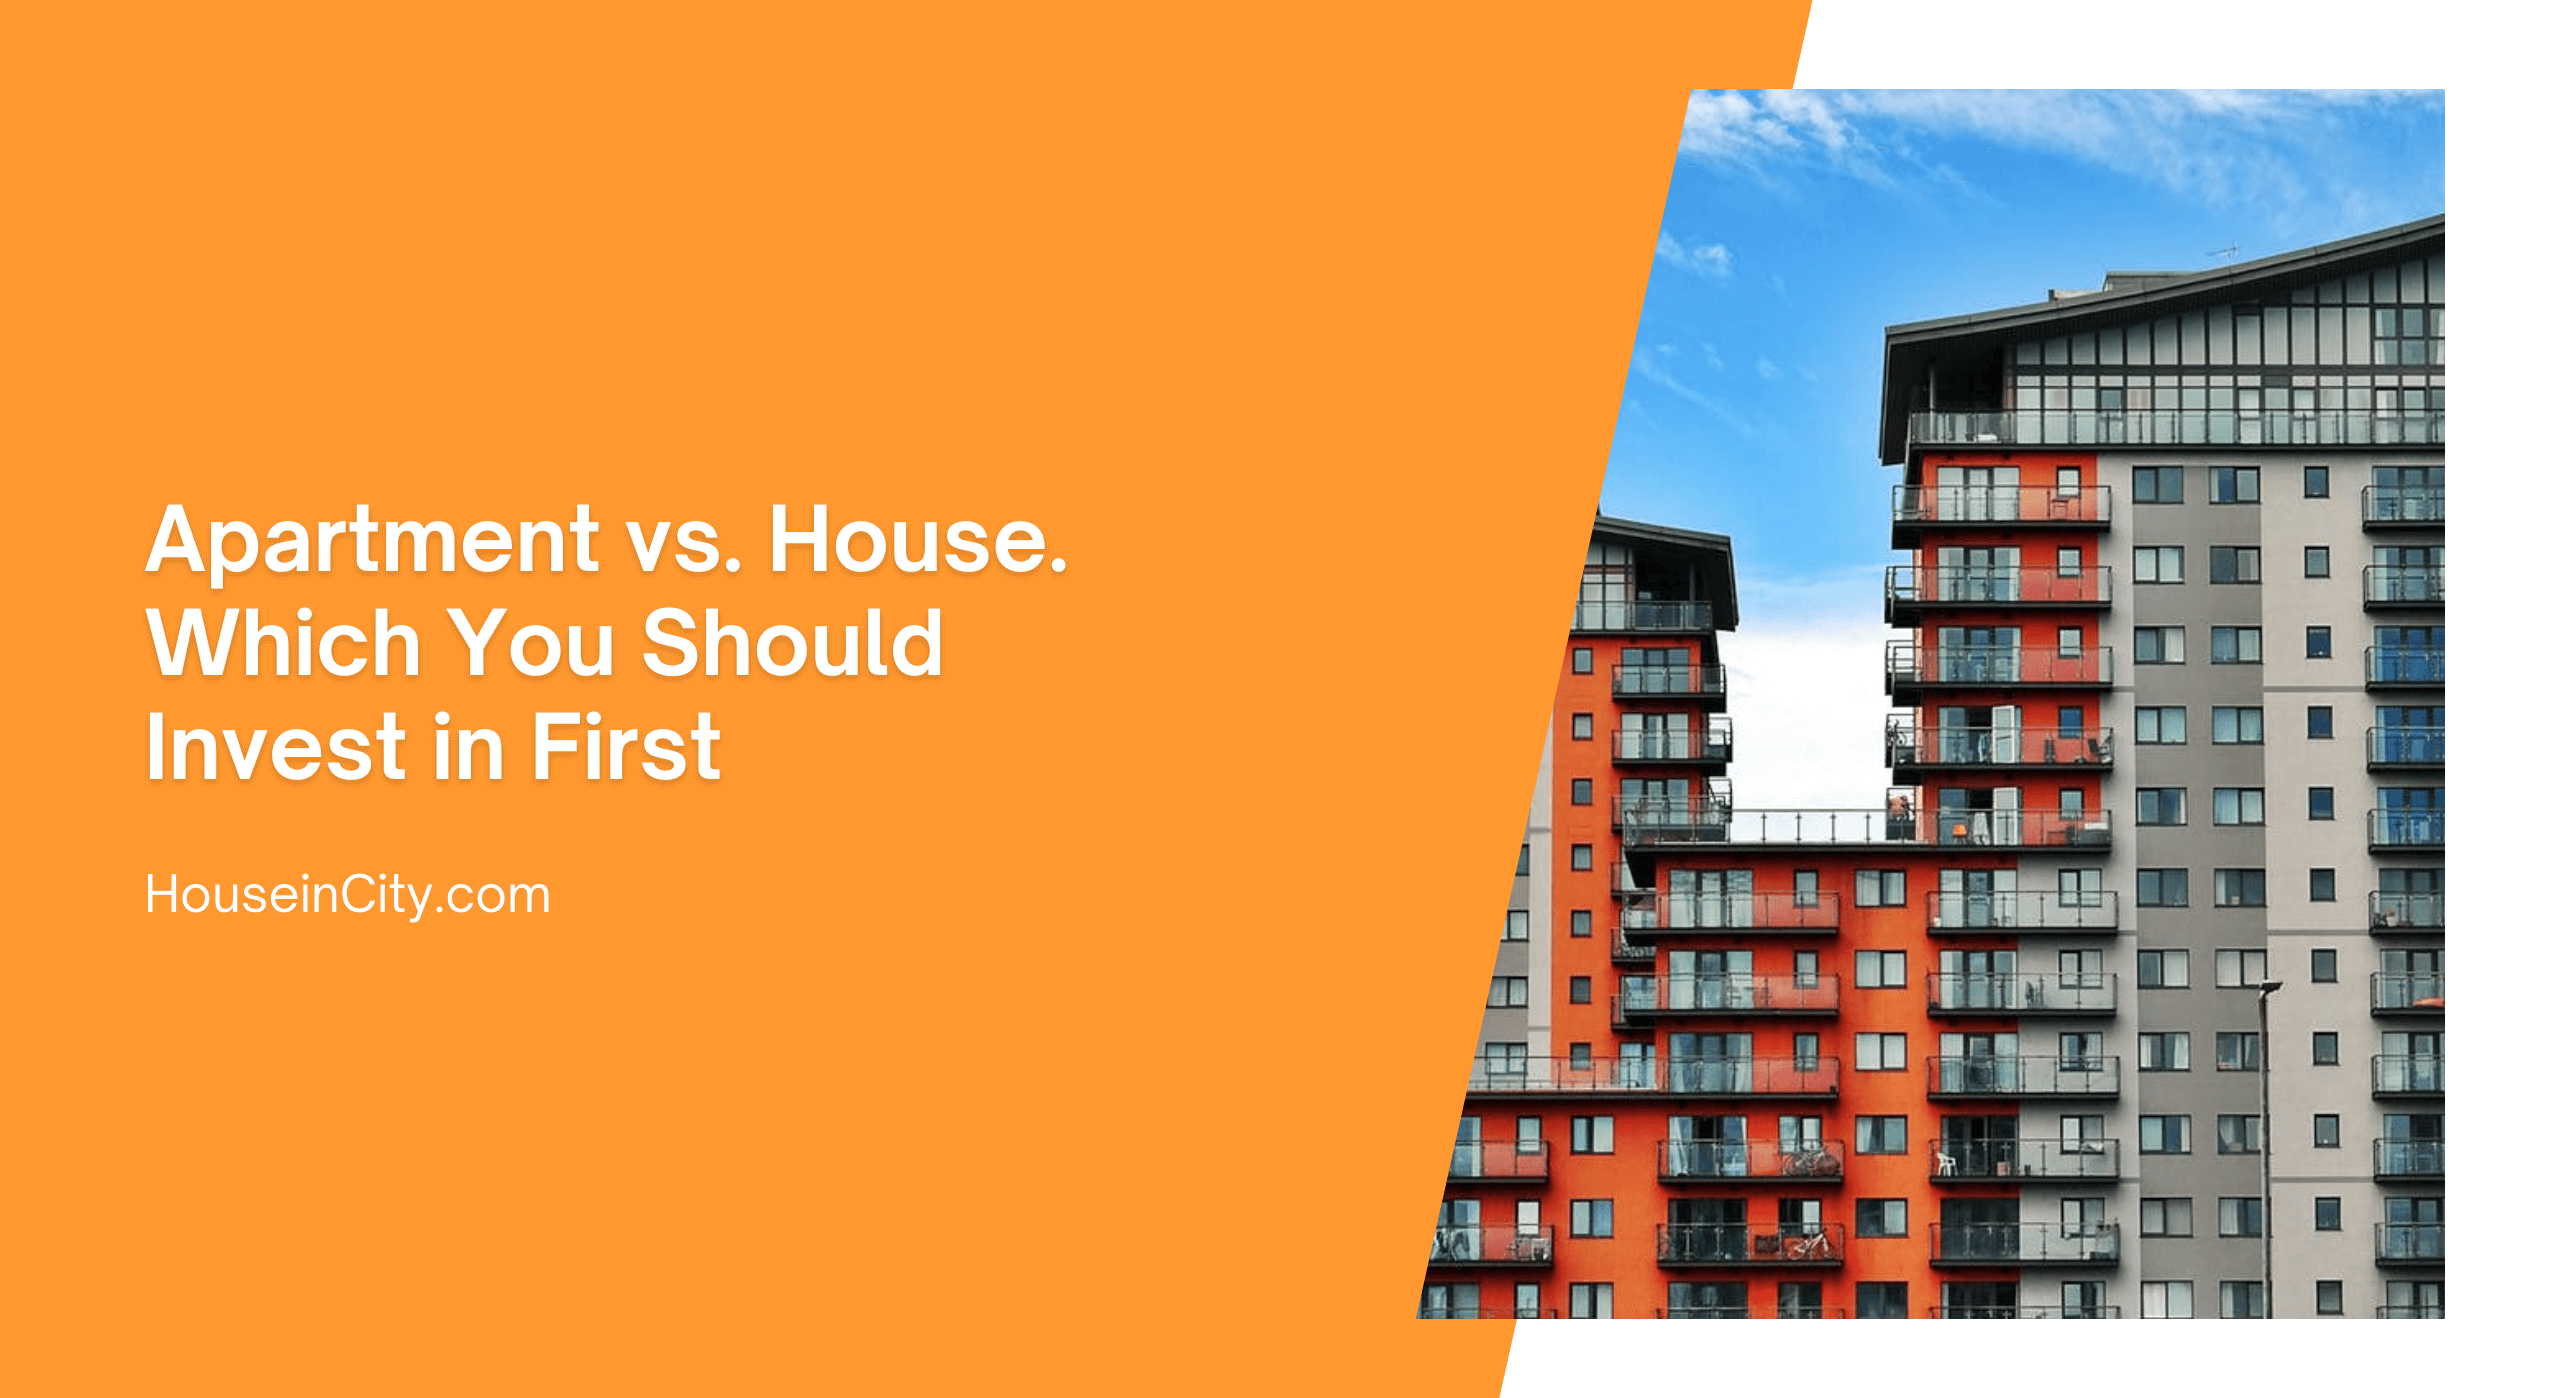 Apartment vs. House. Which You Should Invest in First